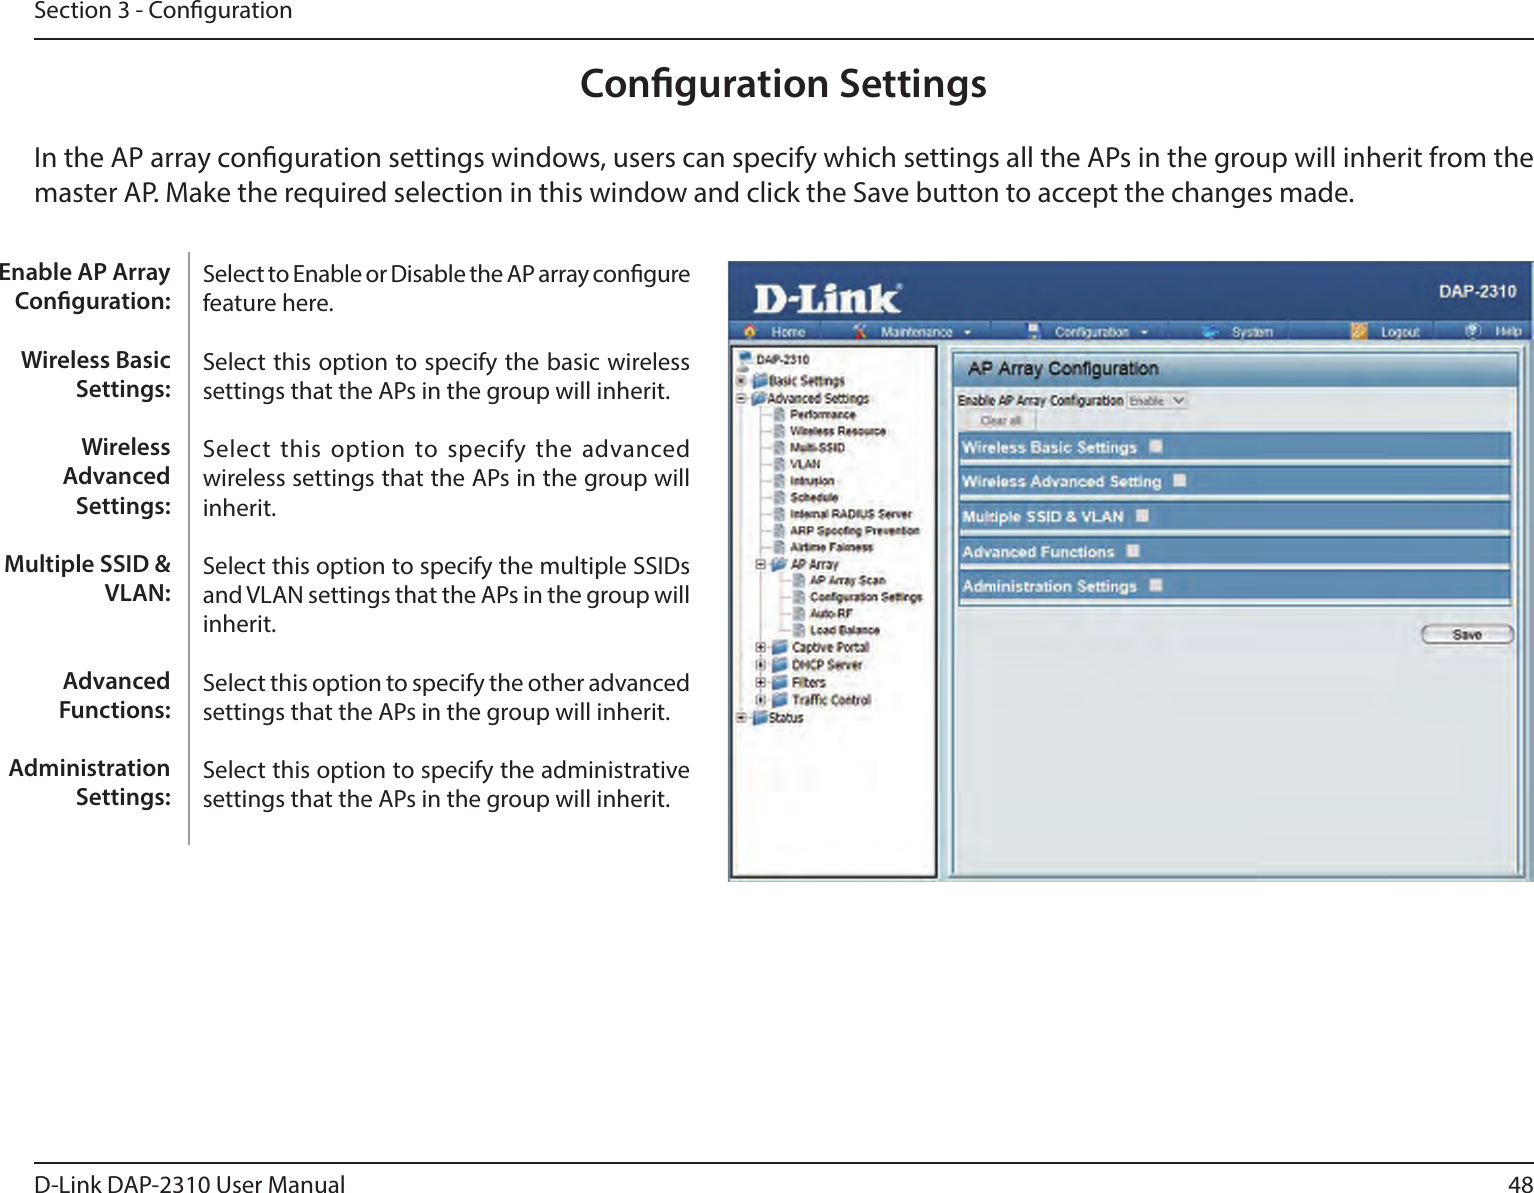 48D-Link DAP-2310 User ManualSection 3 - CongurationConguration SettingsIn the AP array conguration settings windows, users can specify which settings all the APs in the group will inherit from the master AP. Make the required selection in this window and click the Save button to accept the changes made.Select to Enable or Disable the AP array congure feature here.Select this option to specify the basic wireless settings that the APs in the group will inherit.Select  this option to  specify the advanced wireless settings that the APs in the group will inherit.Select this option to specify the multiple SSIDs and VLAN settings that the APs in the group will inherit.Select this option to specify the other advanced settings that the APs in the group will inherit.Select this option to specify the administrative settings that the APs in the group will inherit.Enable AP Array Conguration:Wireless Basic Settings:Wireless Advanced Settings:Multiple SSID &amp; VLAN:Advanced Functions:Administration Settings: